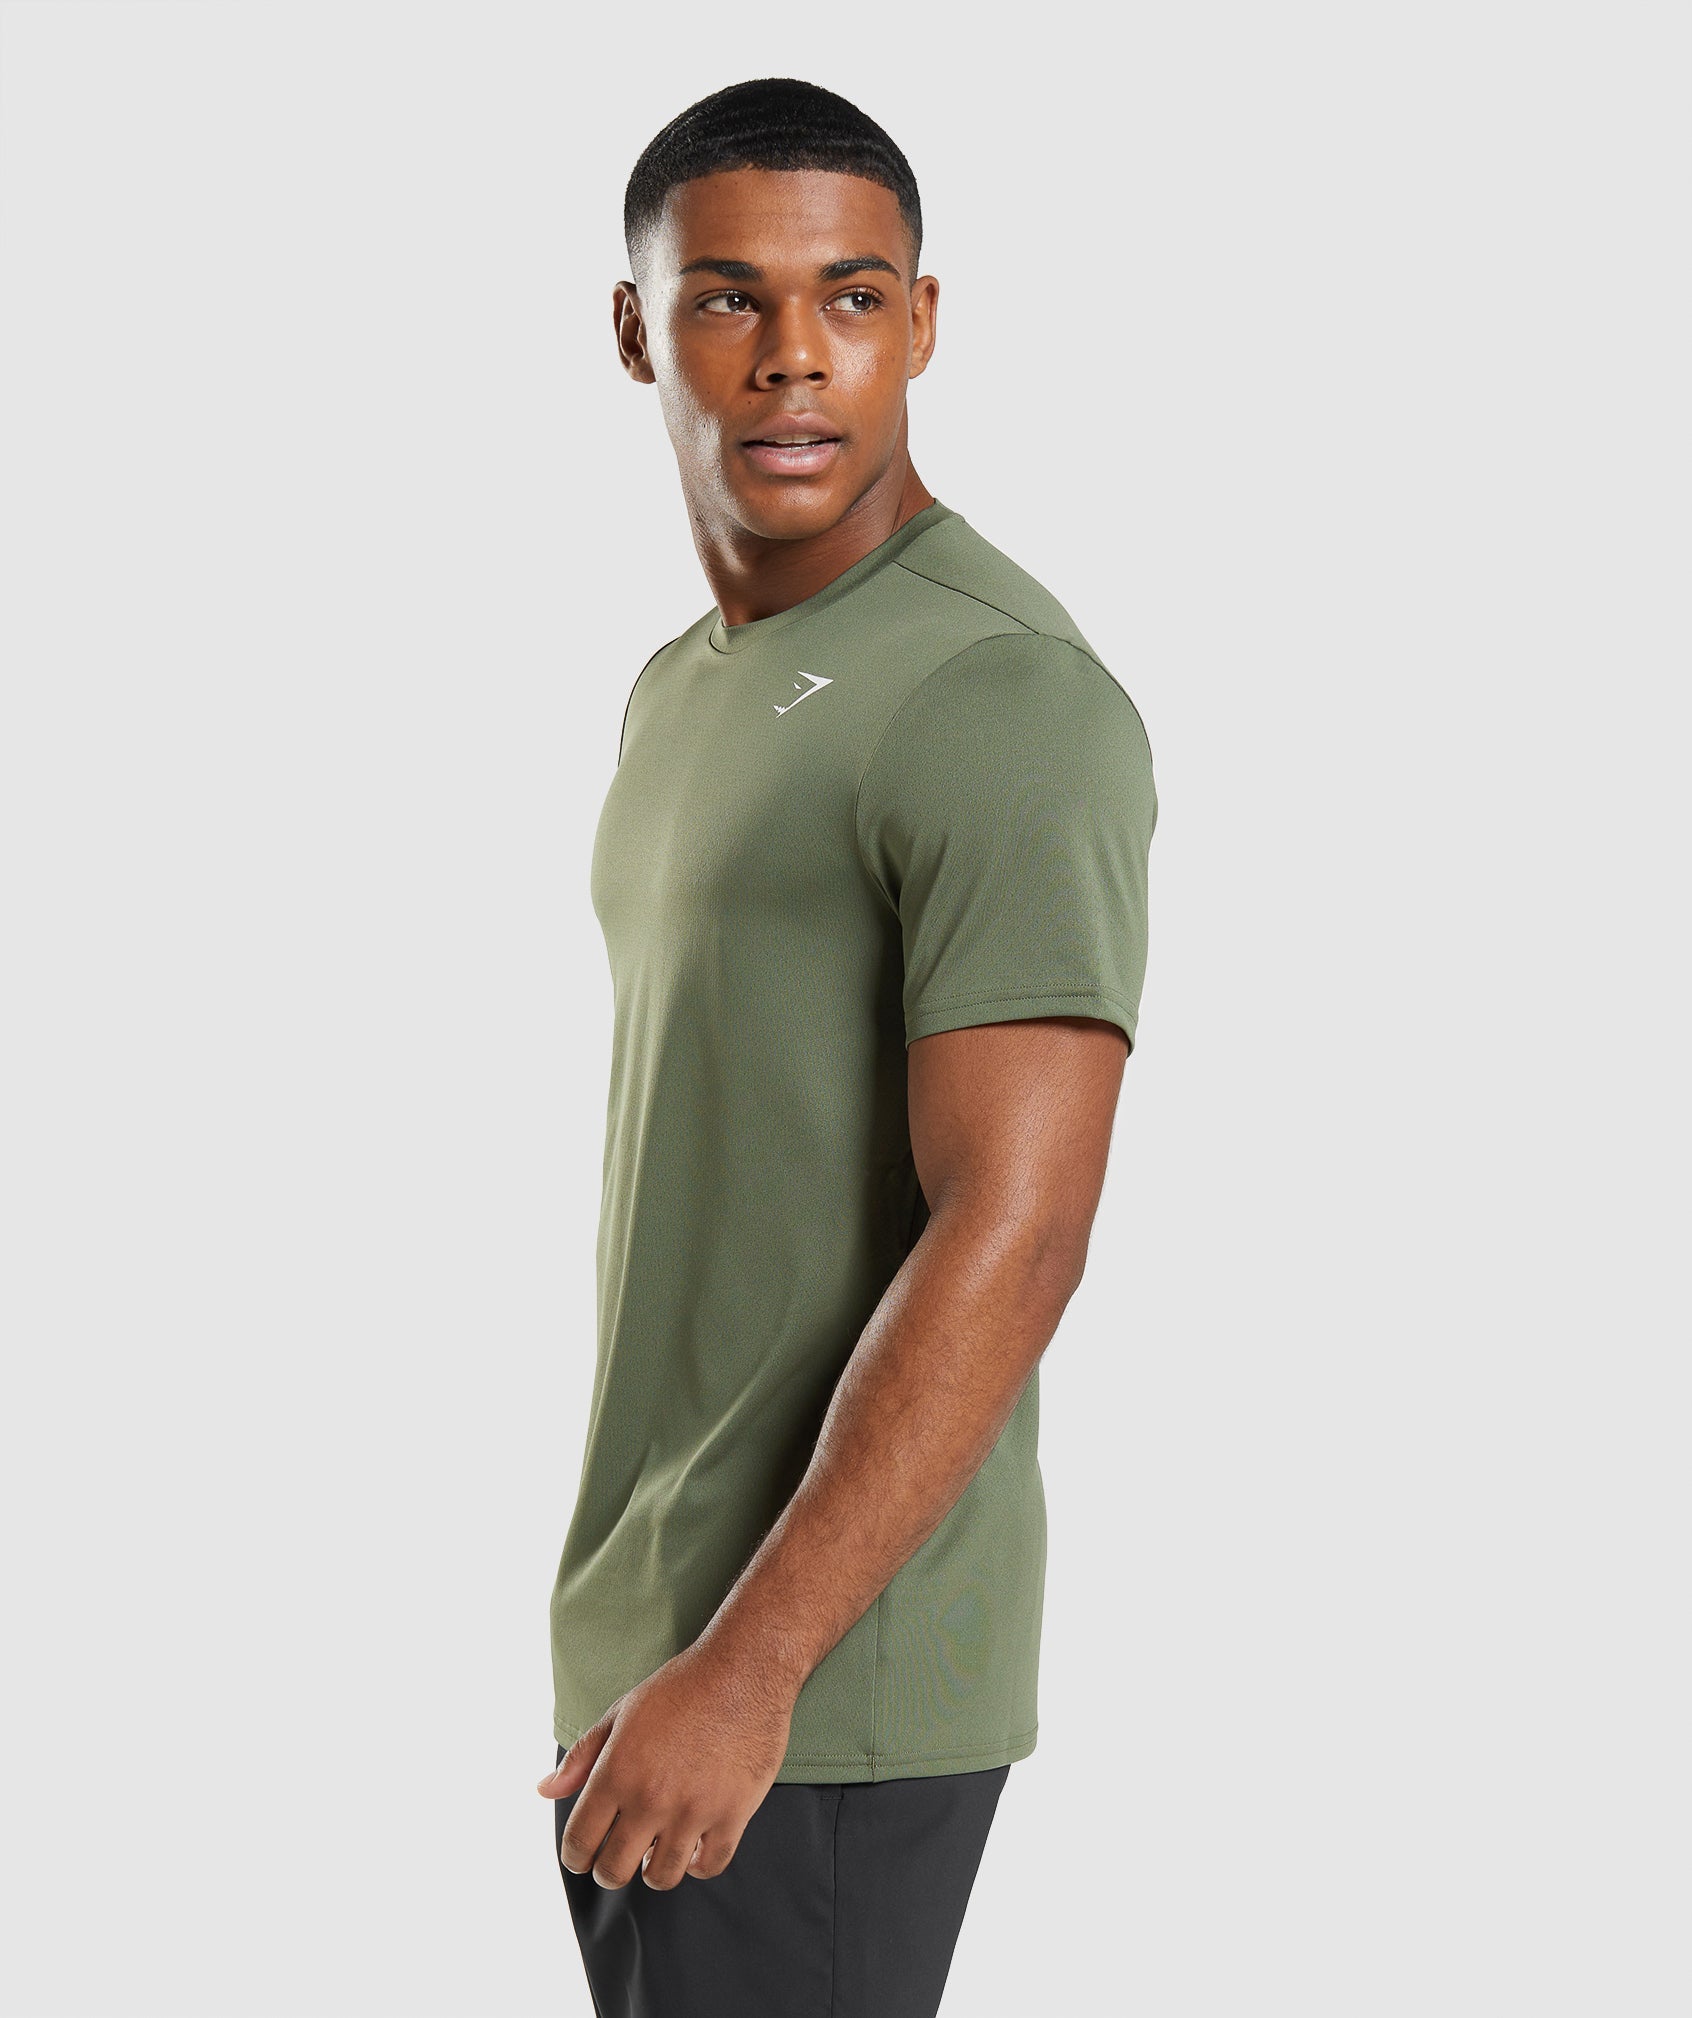 Arrival T-Shirt in Core Olive